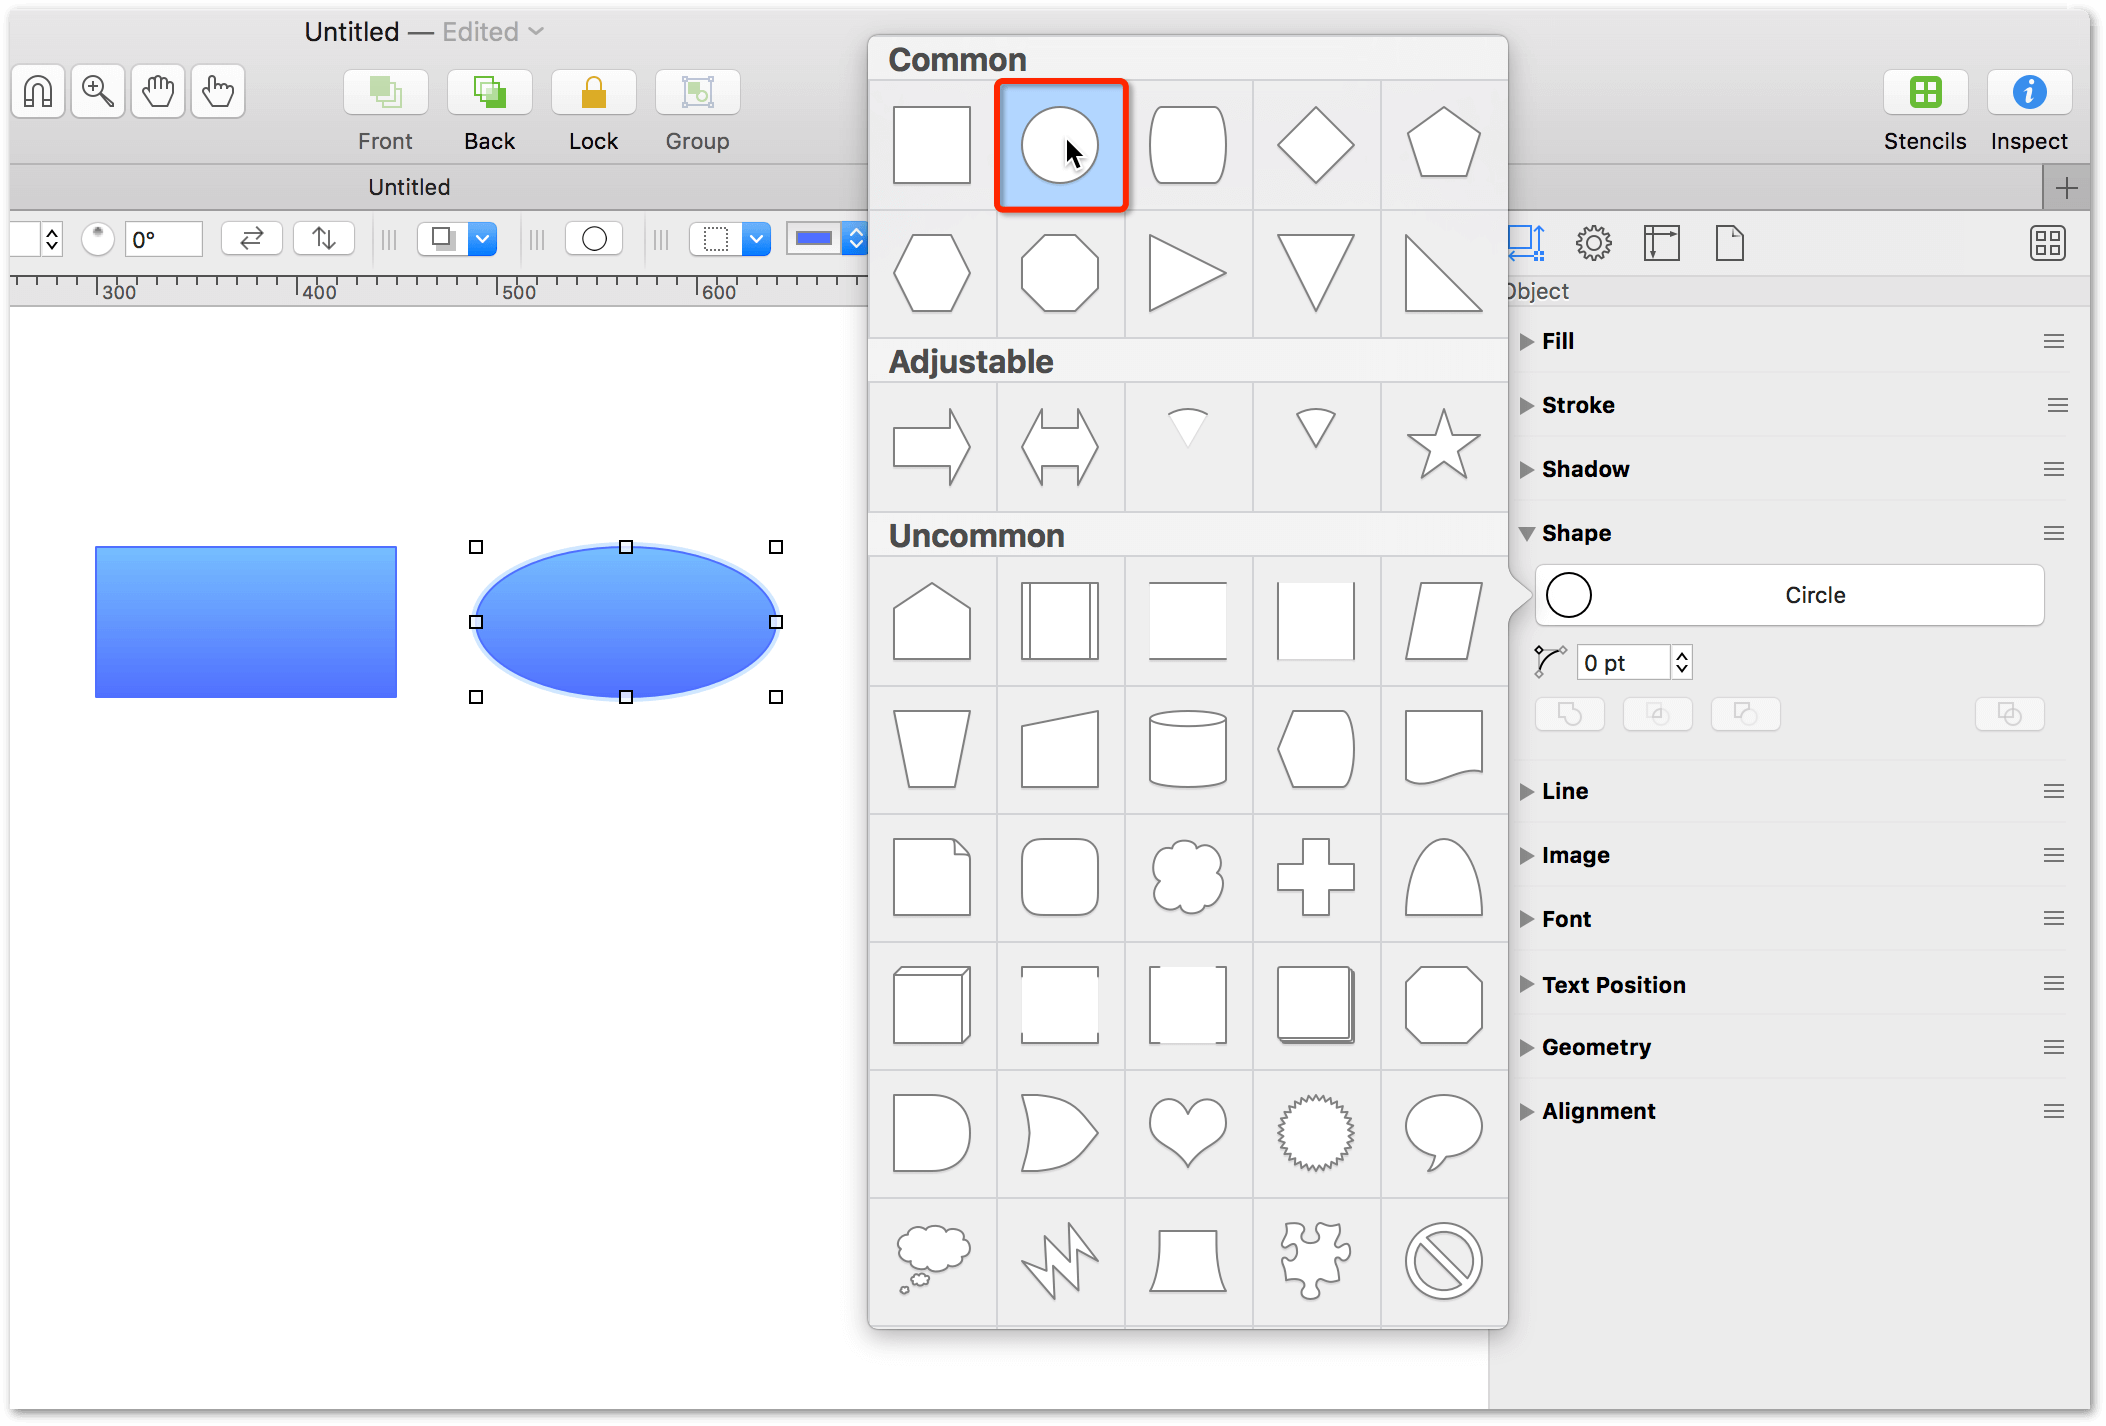 Changing a shape using the Shape inspector